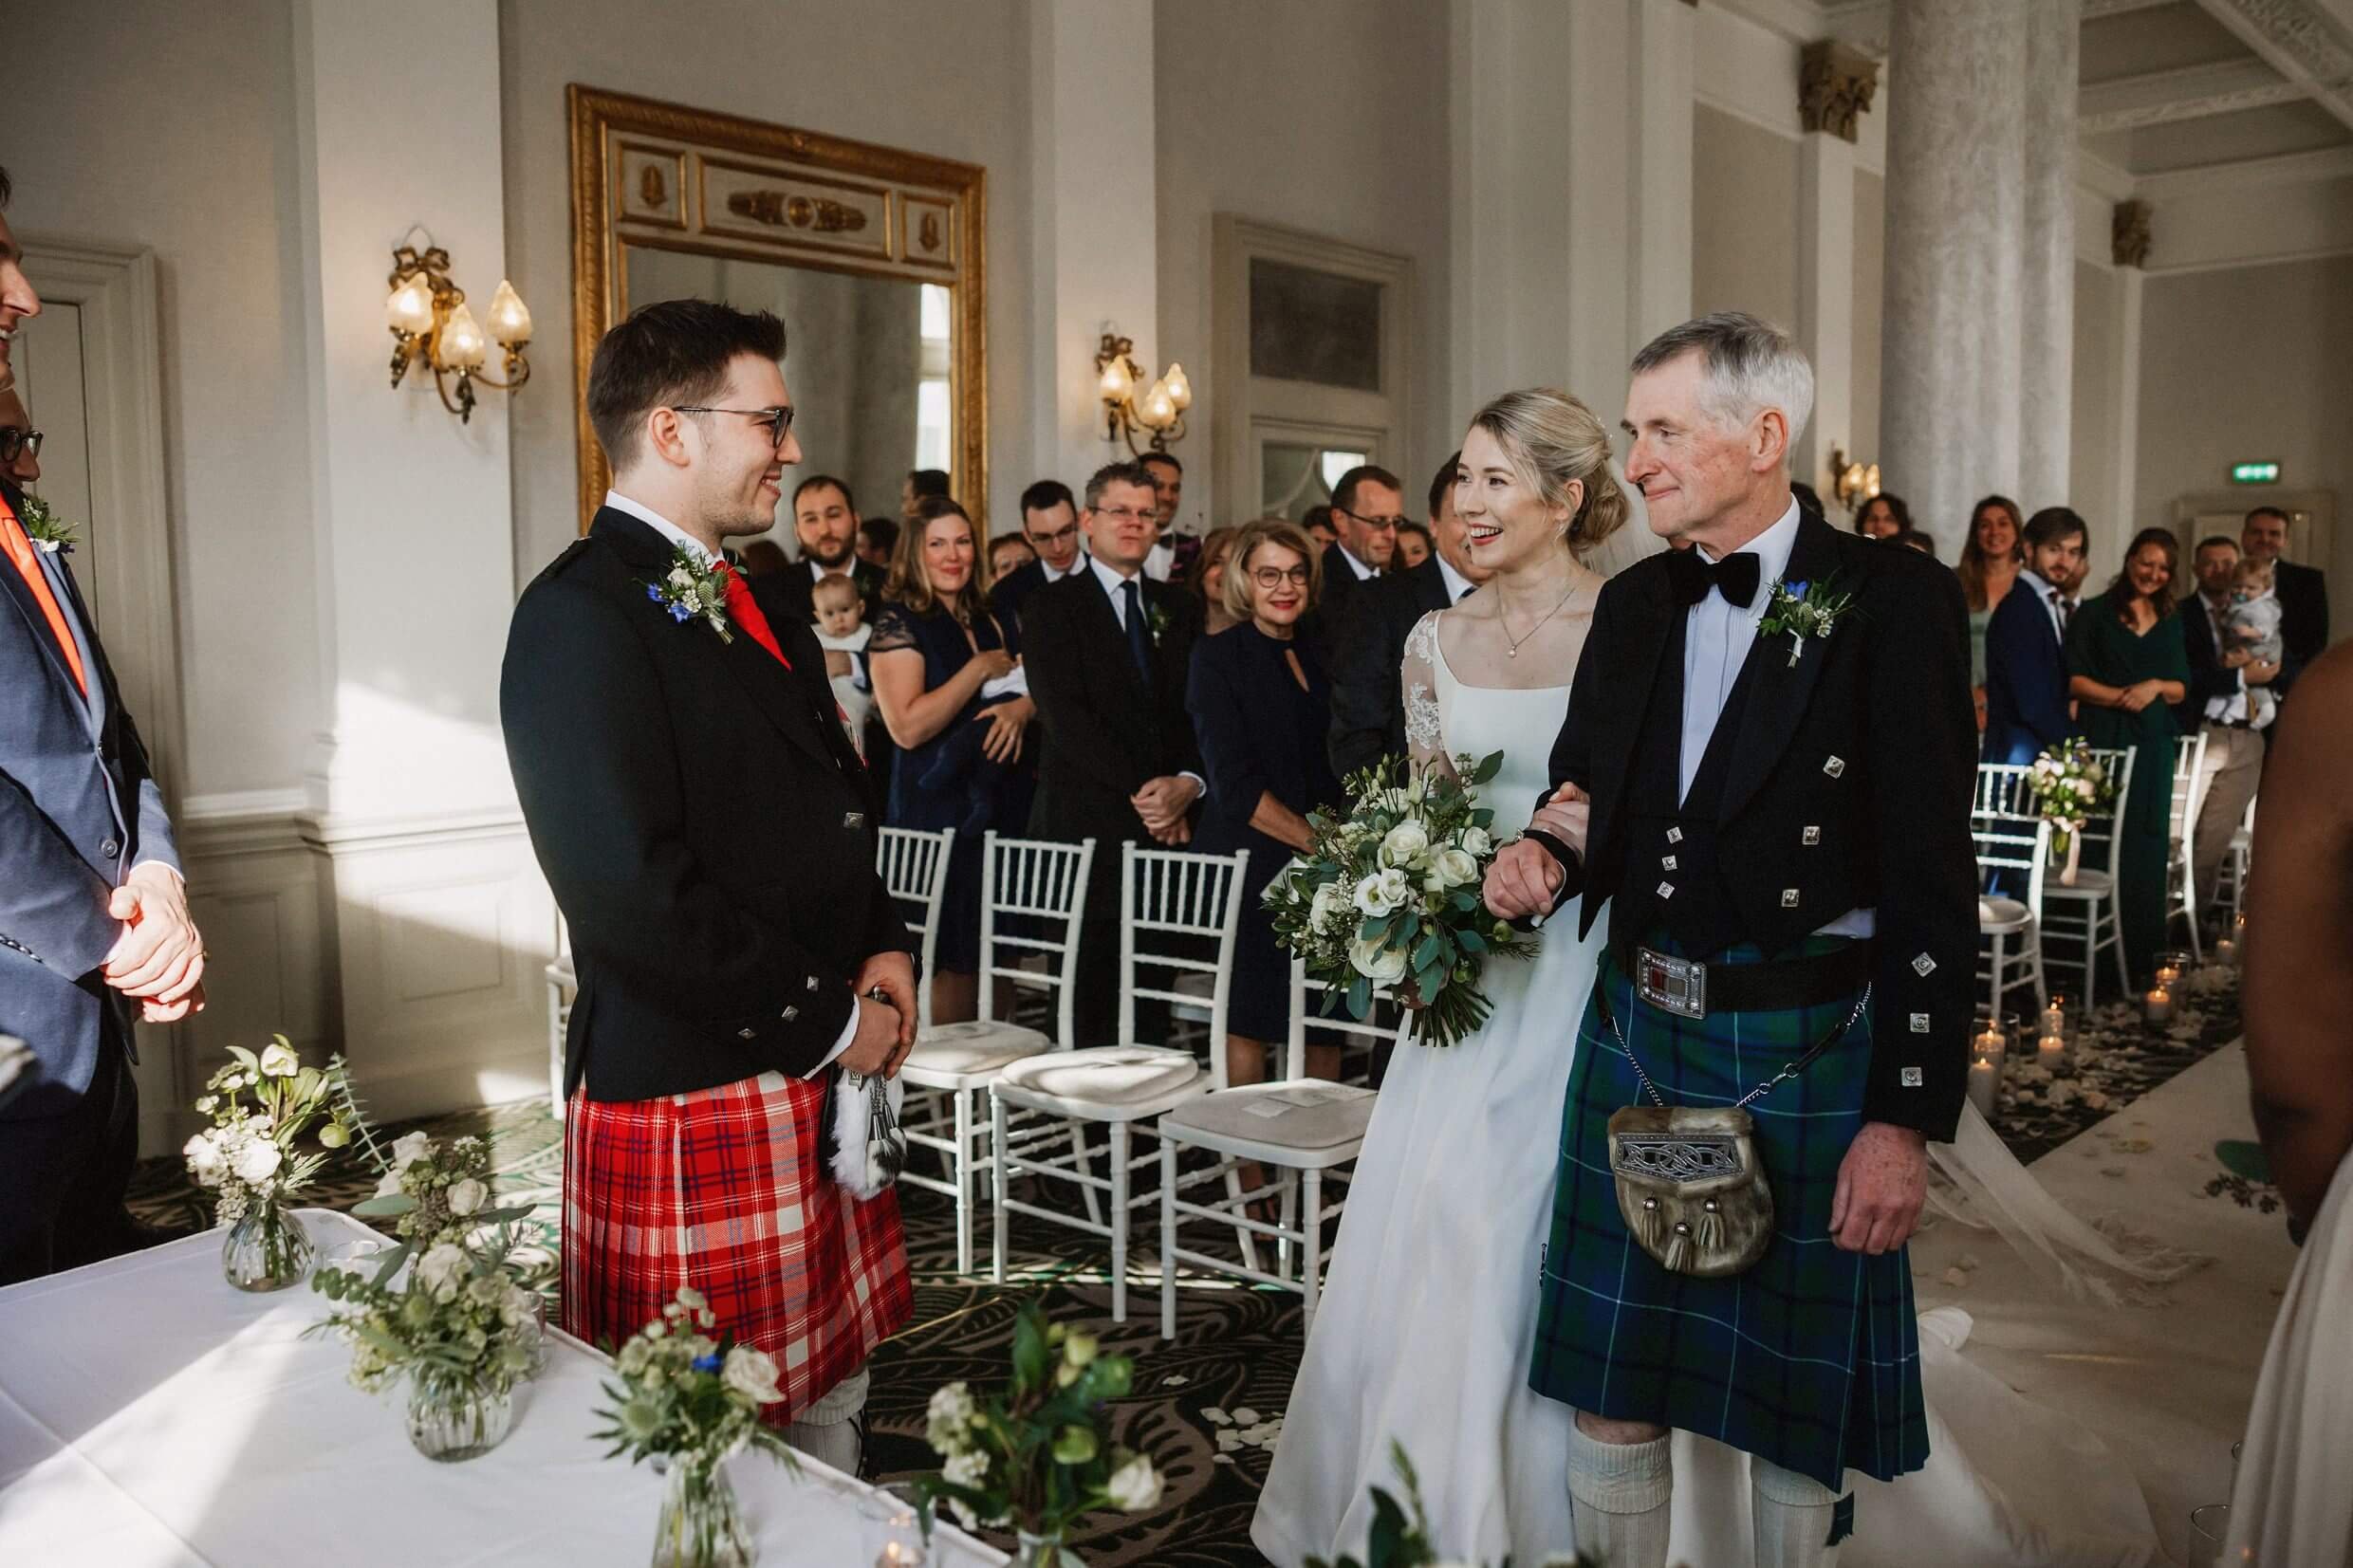 the bride and father of the bride meet the groom at the top of the aisle as guests look on during balmoral hotel edinburgh wedding ceremony in scotland